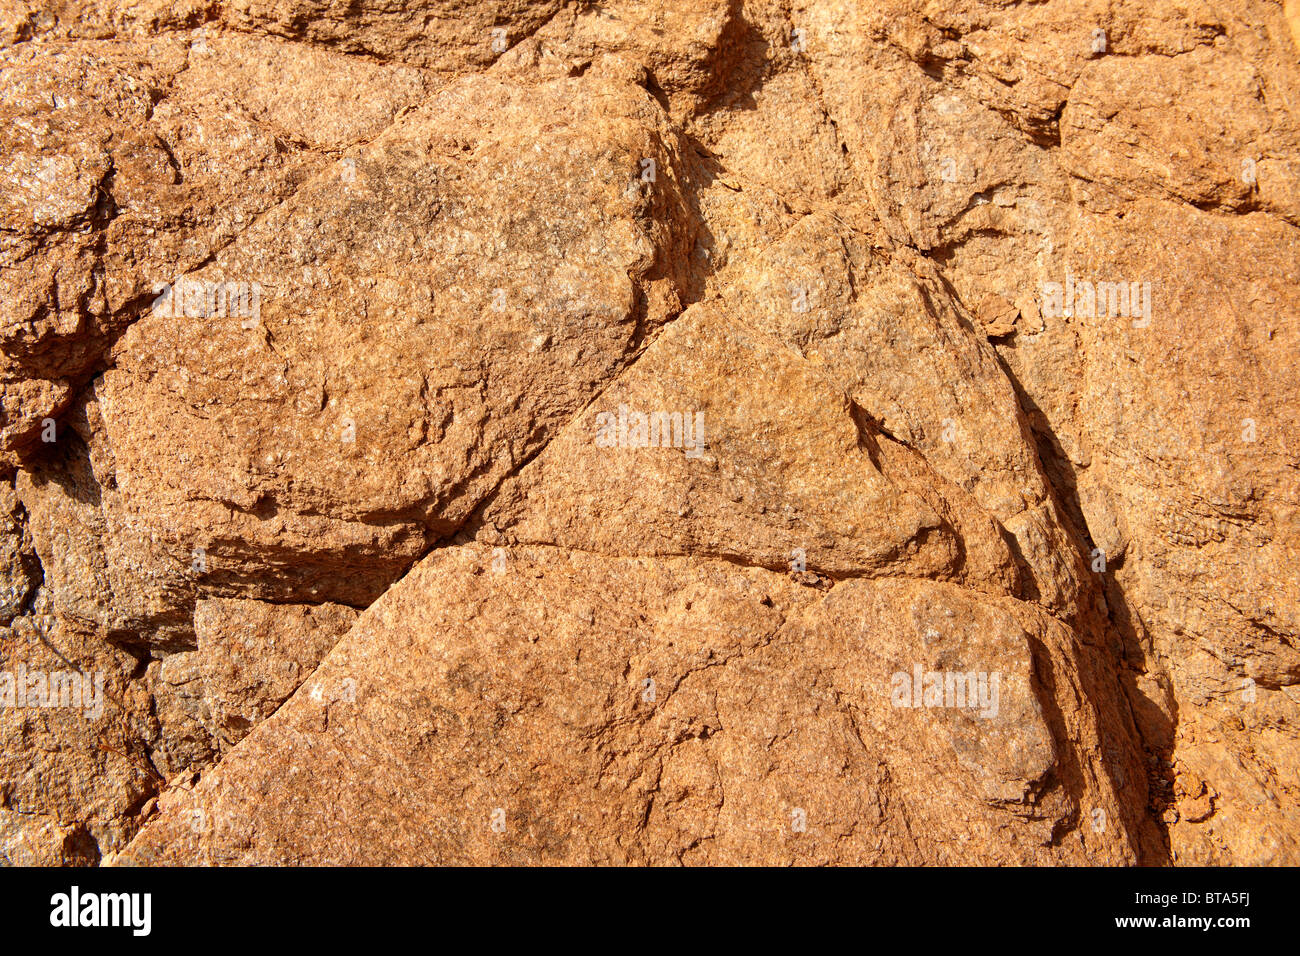 full frame image of natural stone for textured background Stock Photo